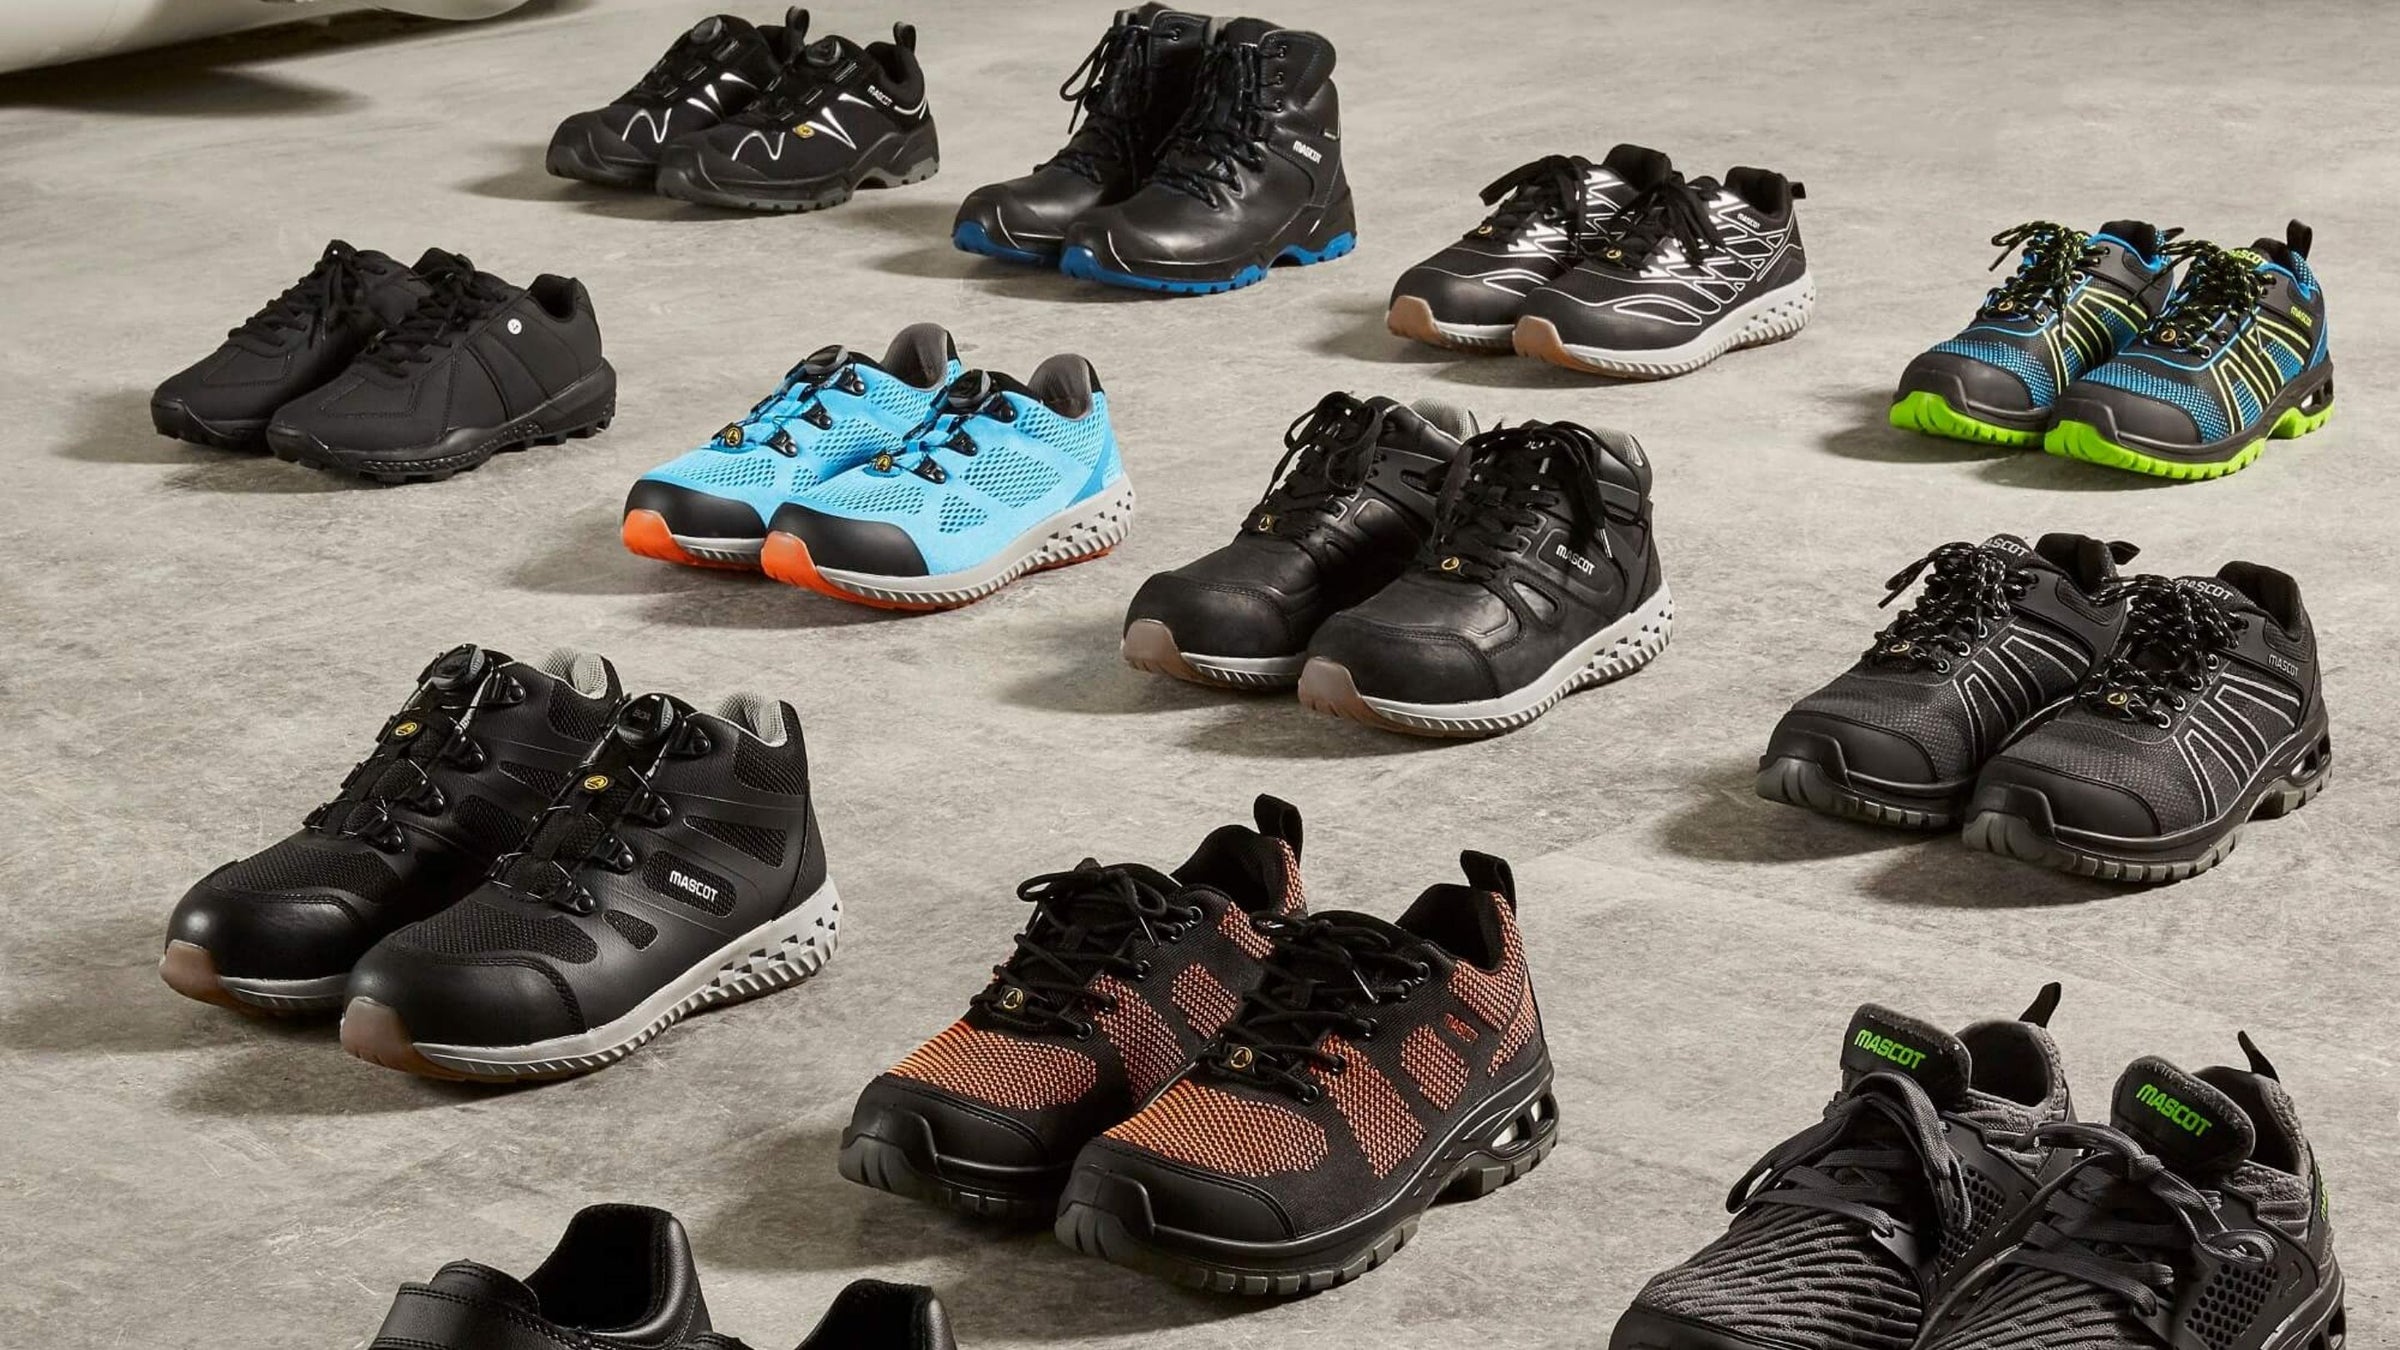 The best Safety Shoes to work with